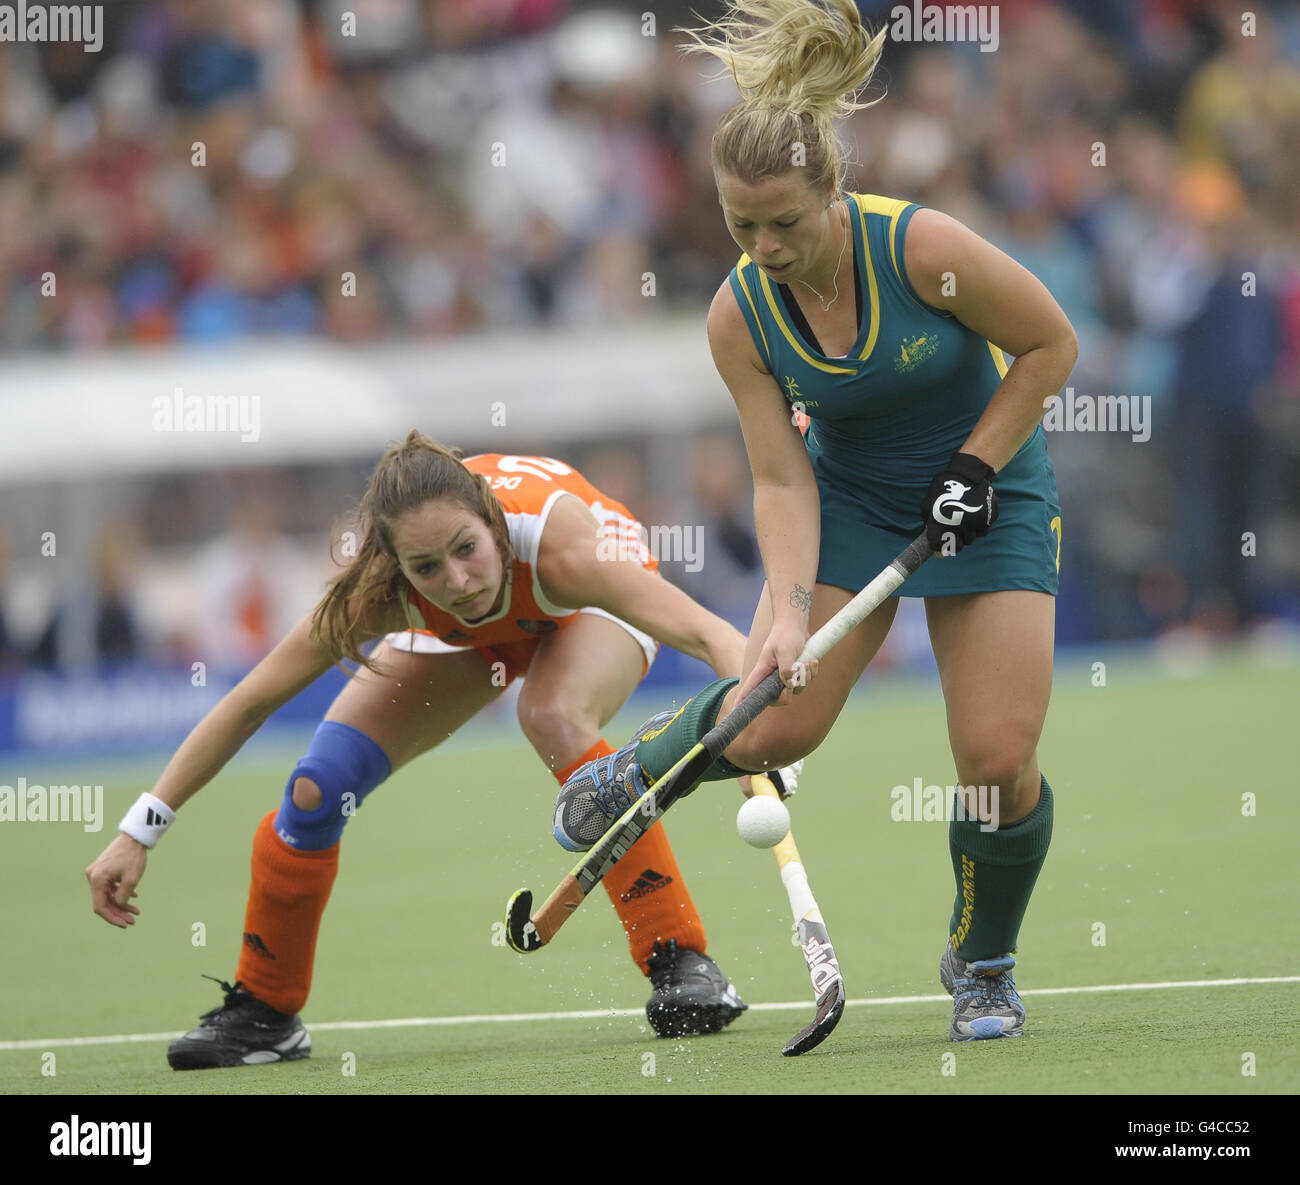 Australia's Jade Warrender gets away from Netherland's Eva de Goede during the Rabo FIH Women's Champions Trophy match at the Wagener Stadium, Amsterdam Stock Photo